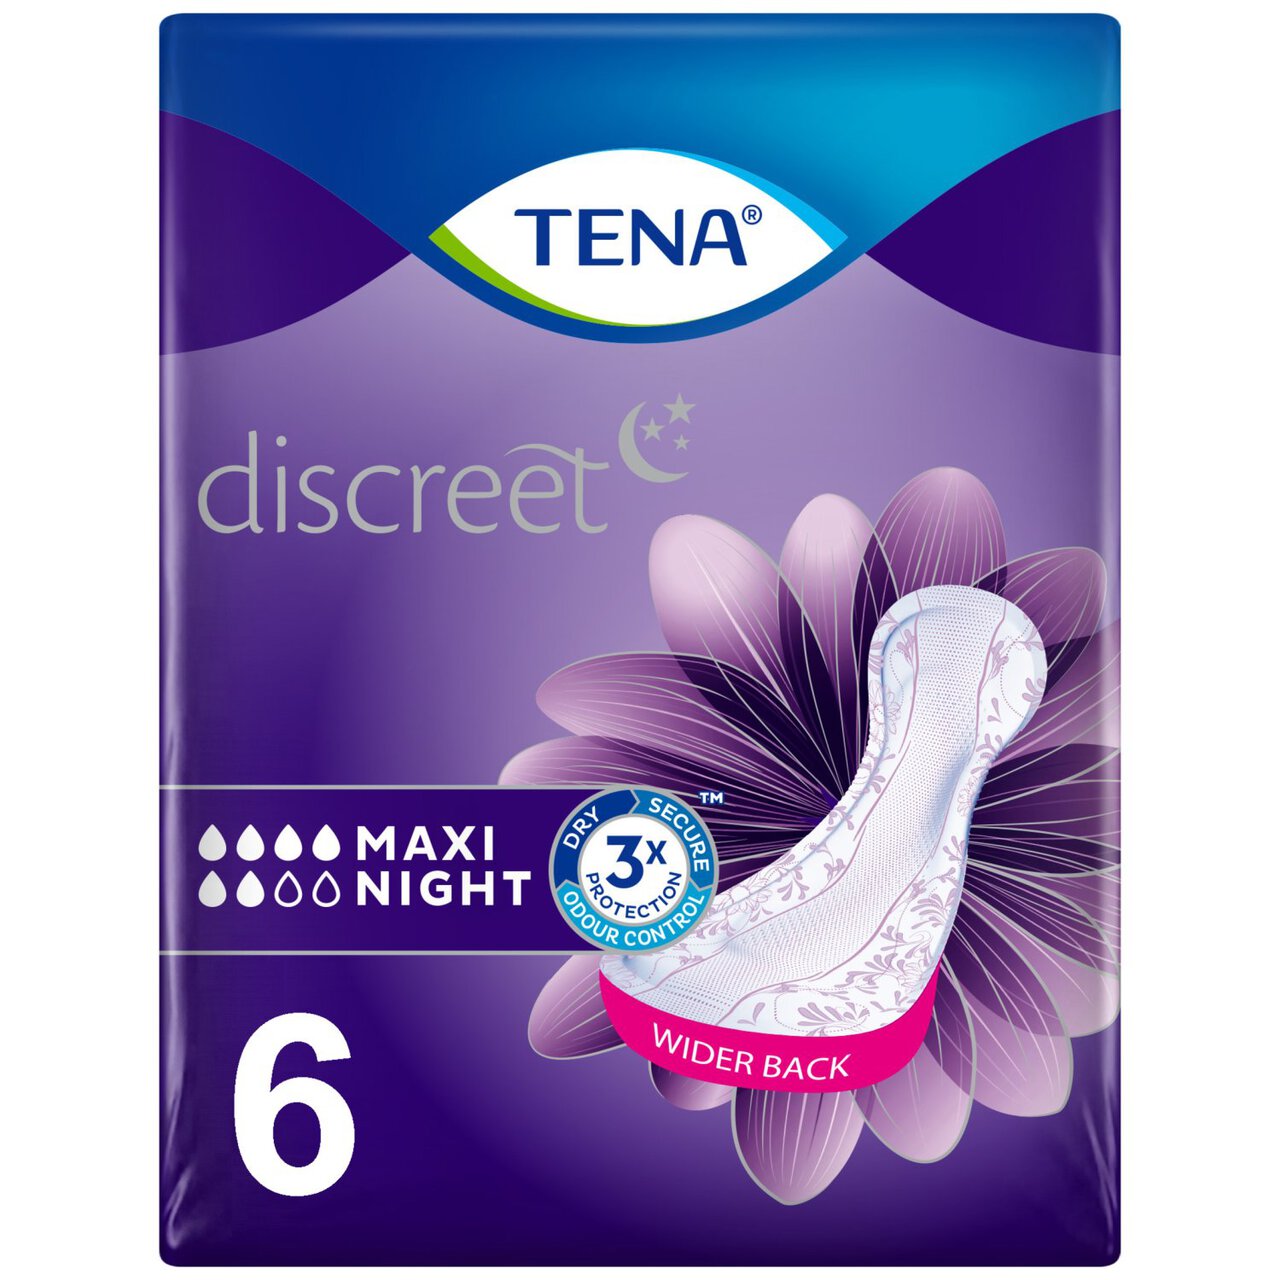 TENA Lady Maxi Incontinence Pads 6 per pack